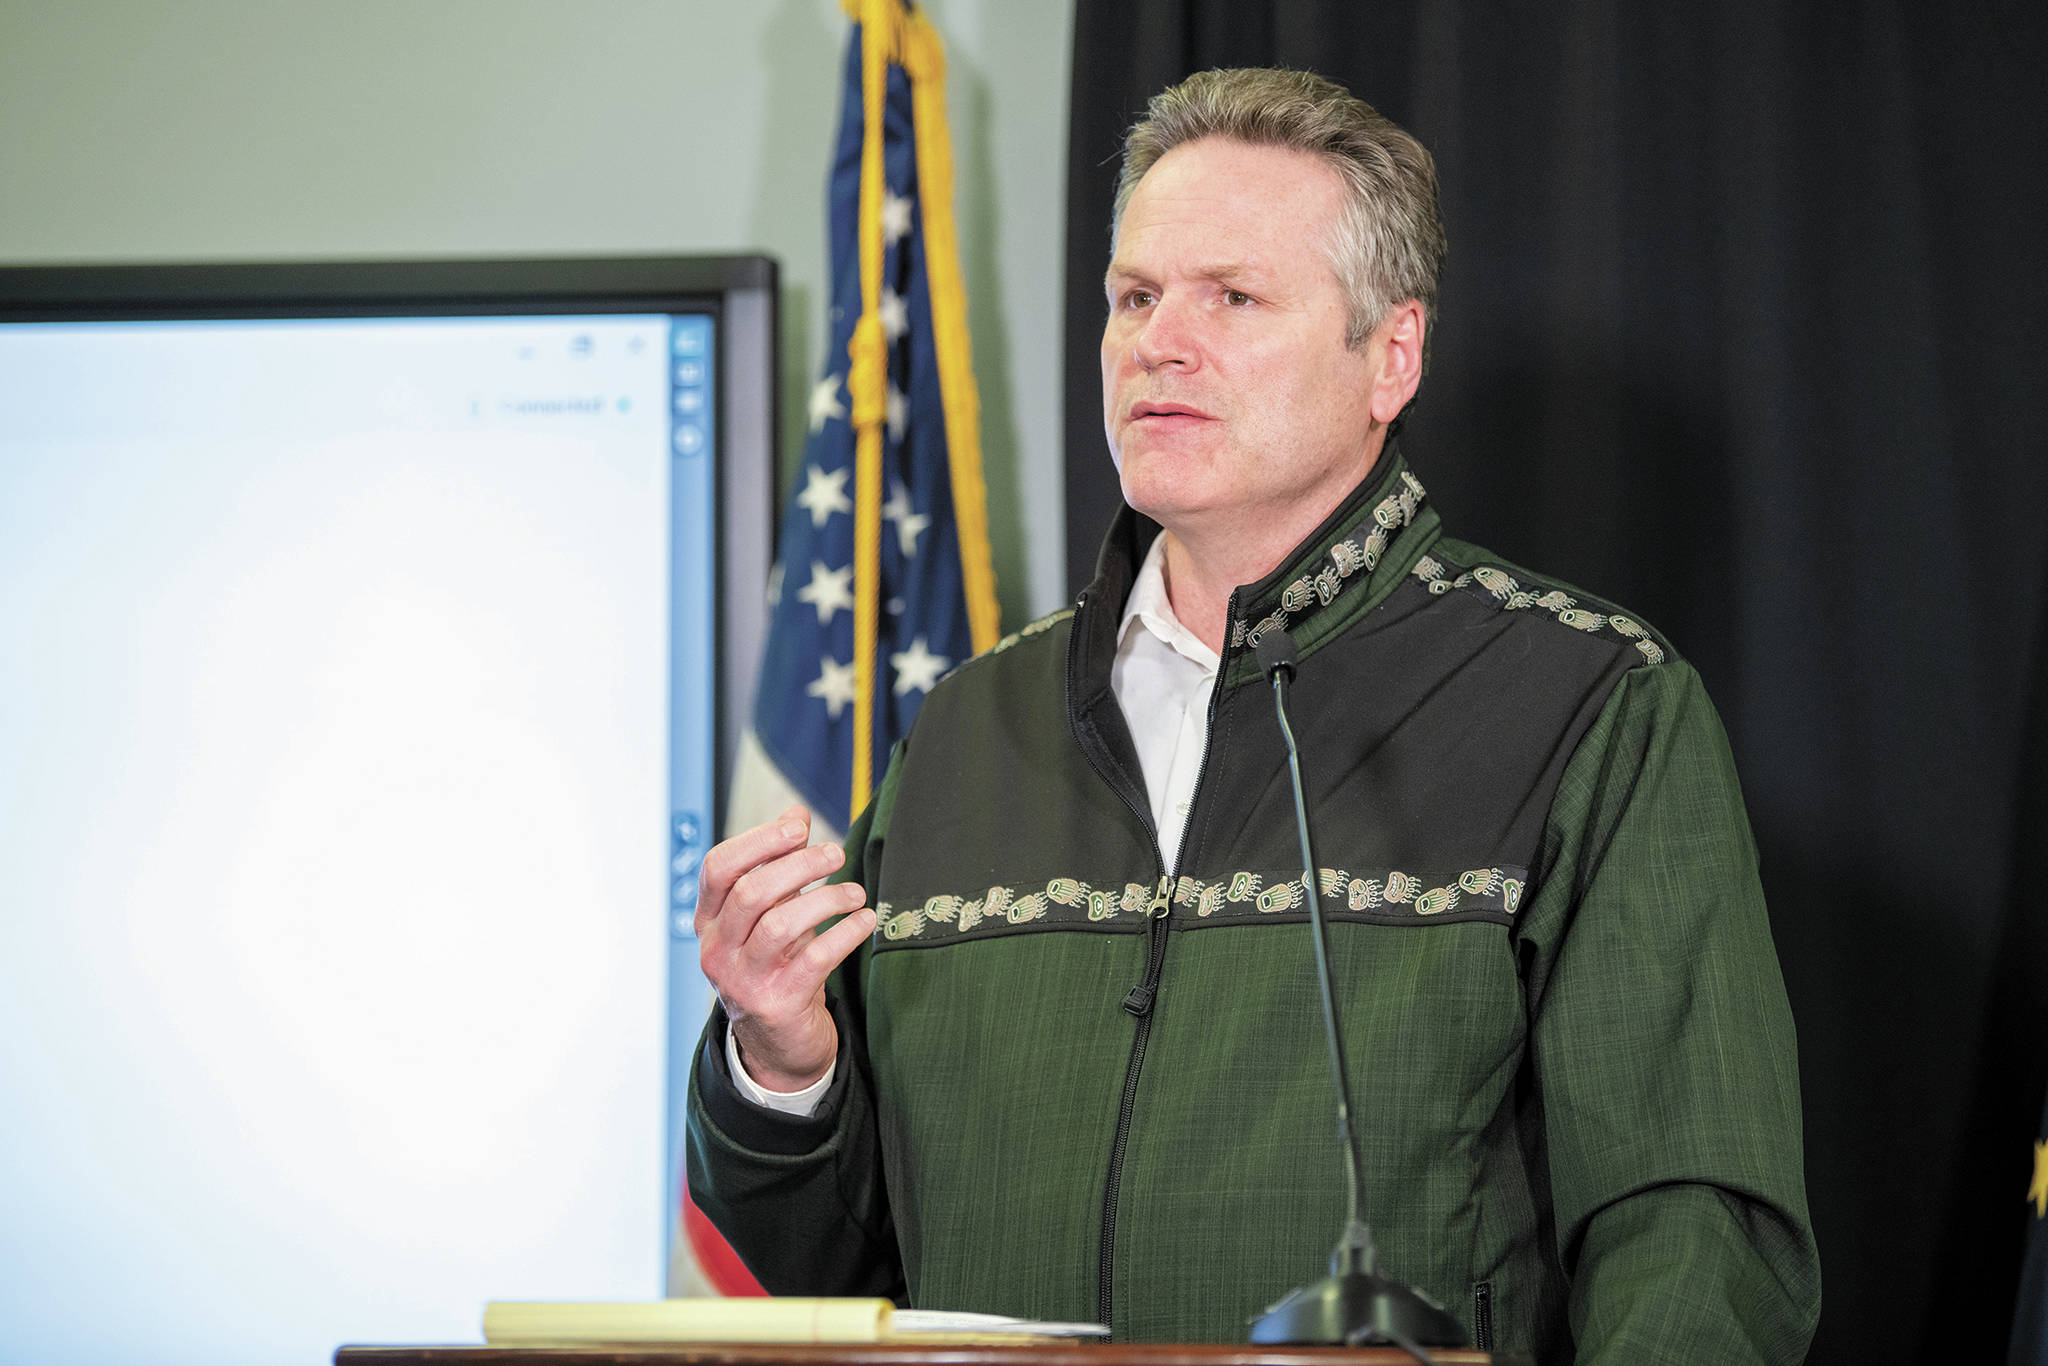 Gov. Mike Dunleavy speaks during a Friday, April 3, 2020 press conference in the Atwood Building in Anchorage, Alaska. (Photo courtesy Office of the Governor)